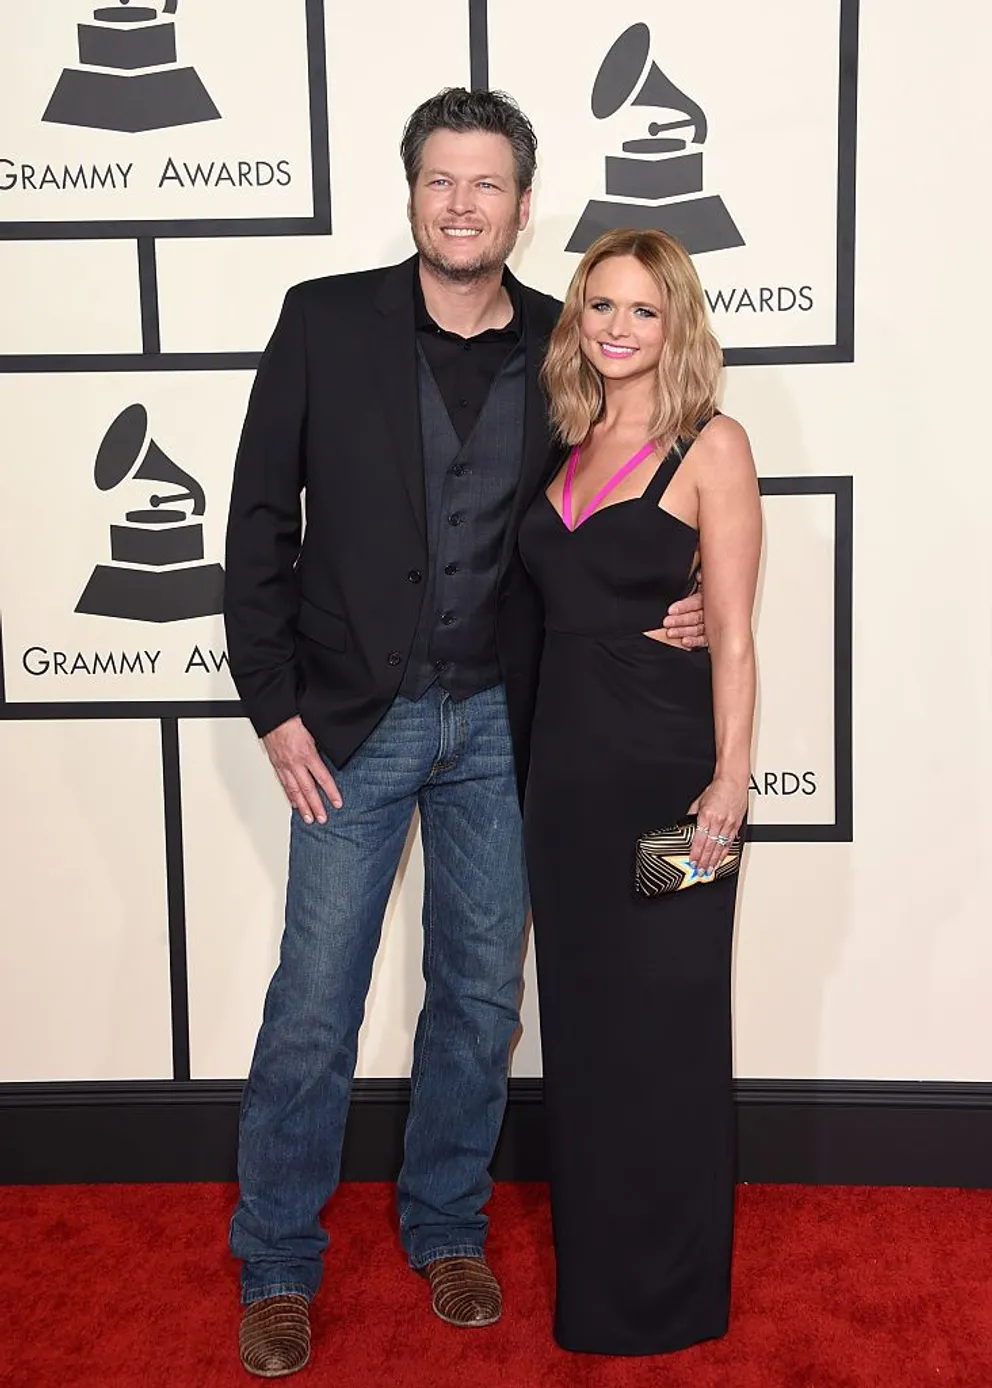 Blake Shelton and Miranda Lambert at The 57th Annual GRAMMY Awards at the STAPLES Center on February 8, 2015 | Photo: Getty Images